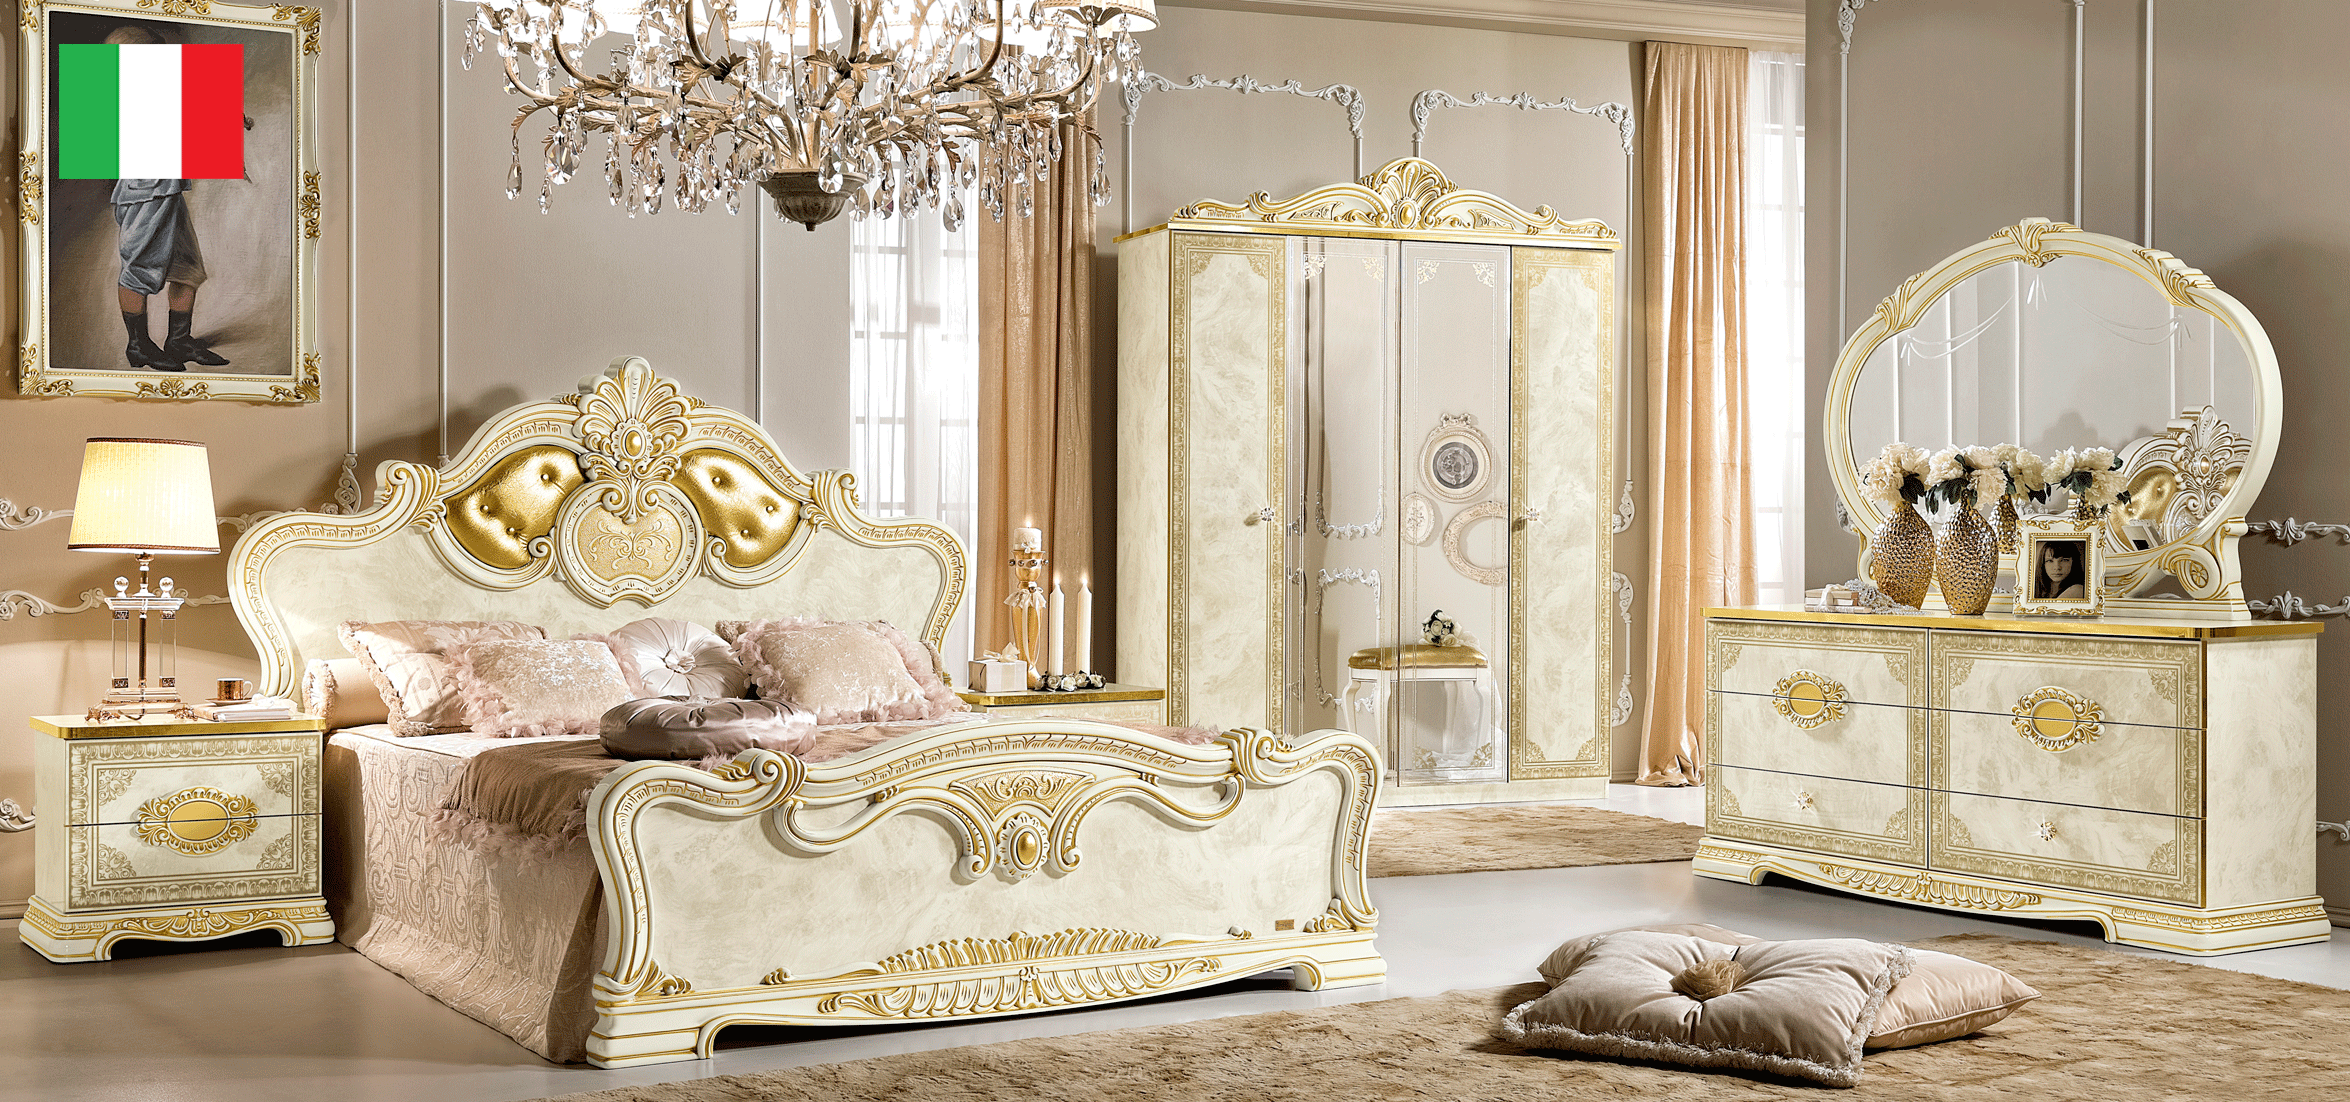 Brands Camel Classic Collection, Italy Leonardo Bedroom, Camelgroup Italy